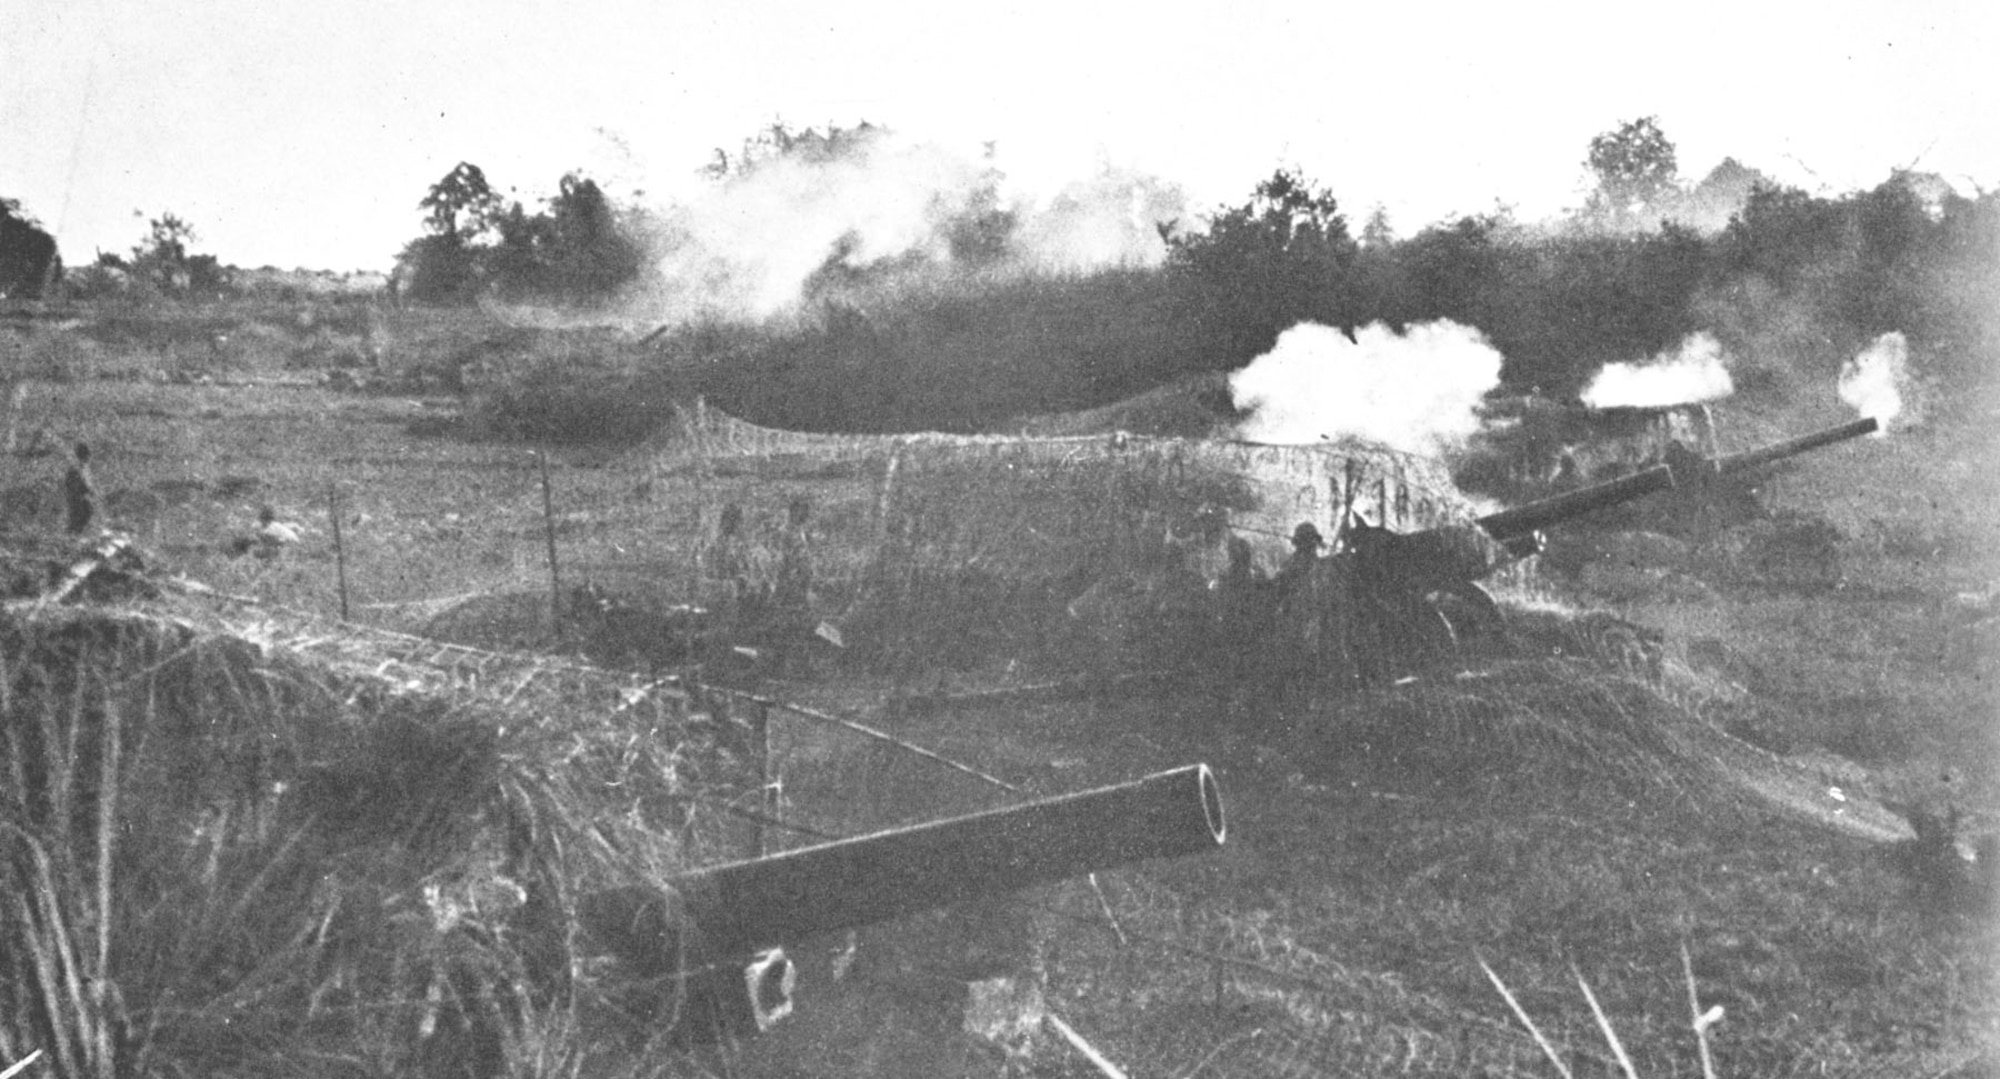 Japanese artillery firing on Bataan. PACR positions received heavy artillery bombardments leading up to the main attack in April 1942. (U.S. Air Force photo)